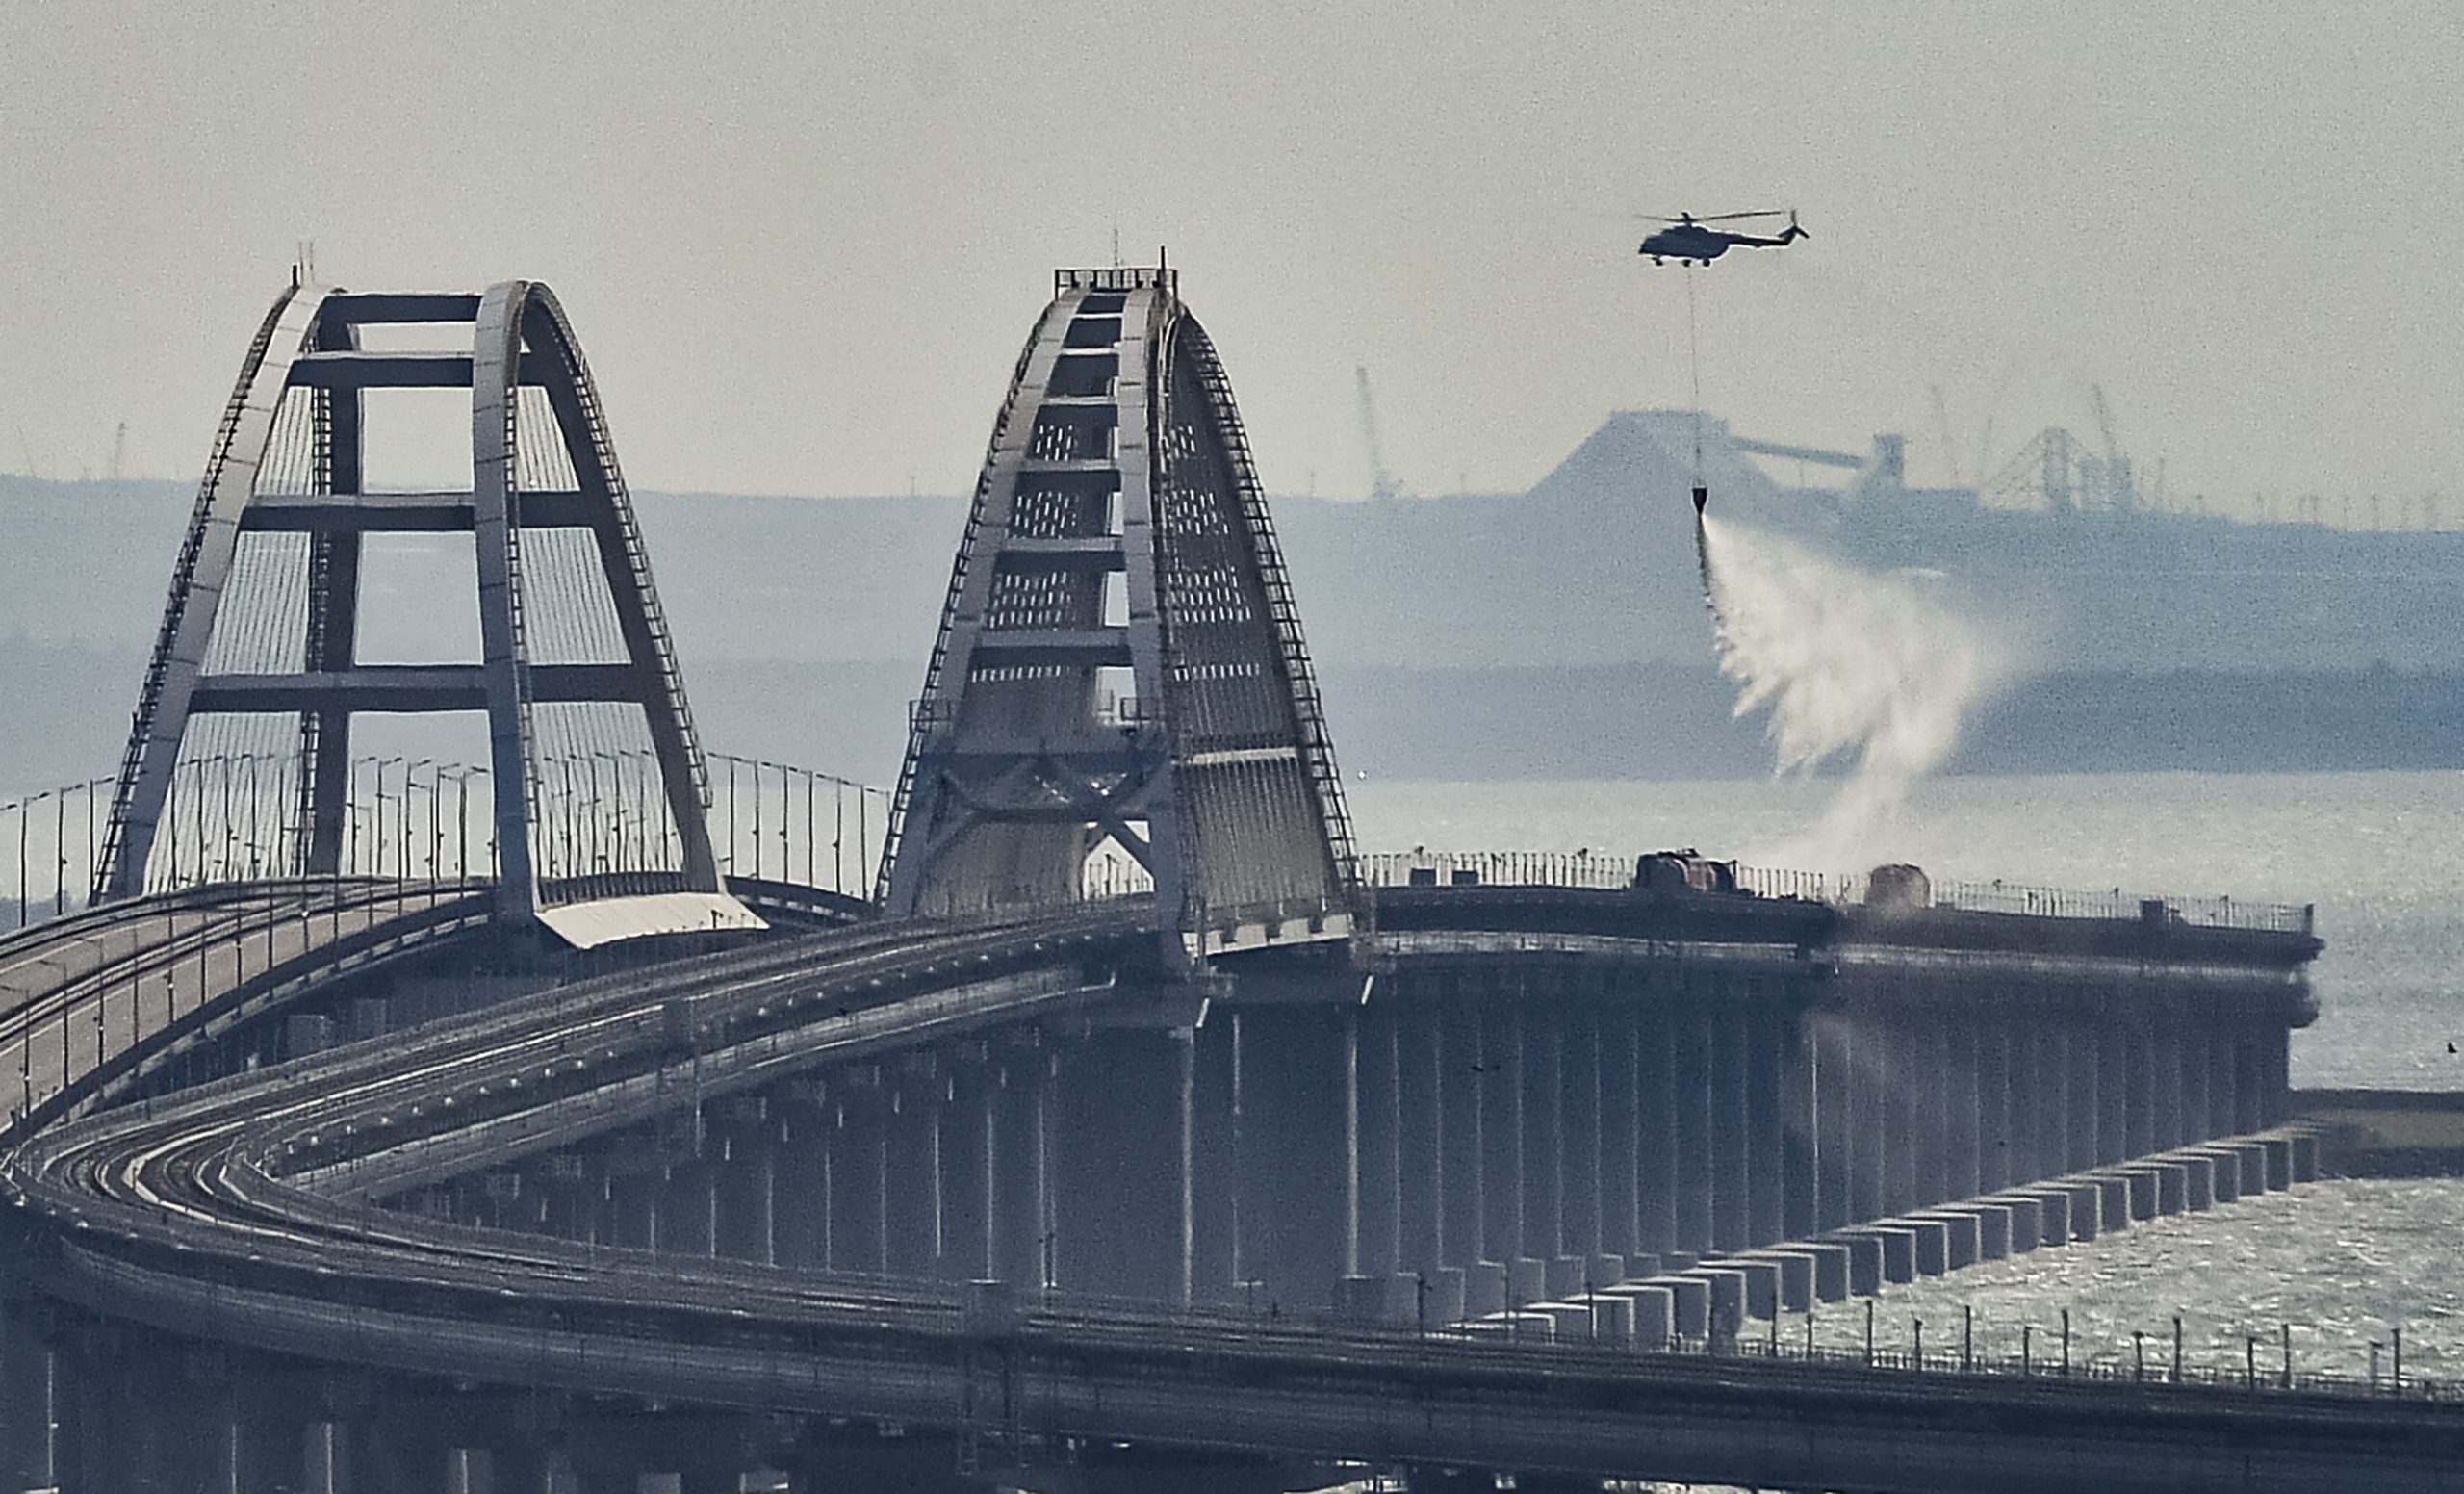 epa10230634 A firefighter helicopter pours water on fire on a collapsed part of the Kerch Strait bridge in Crimea, 08 October 2022. According to Russian authorities, "an explosion was set off at a cargo vehicle on the motorway part of the Crimean bridge on the side of the Taman peninsula, which set fire to seven fuel tanks of a train that was en route to the Crimean peninsula. Two motorway sections of the bridge partially collapsed."  EPA/STRINGER